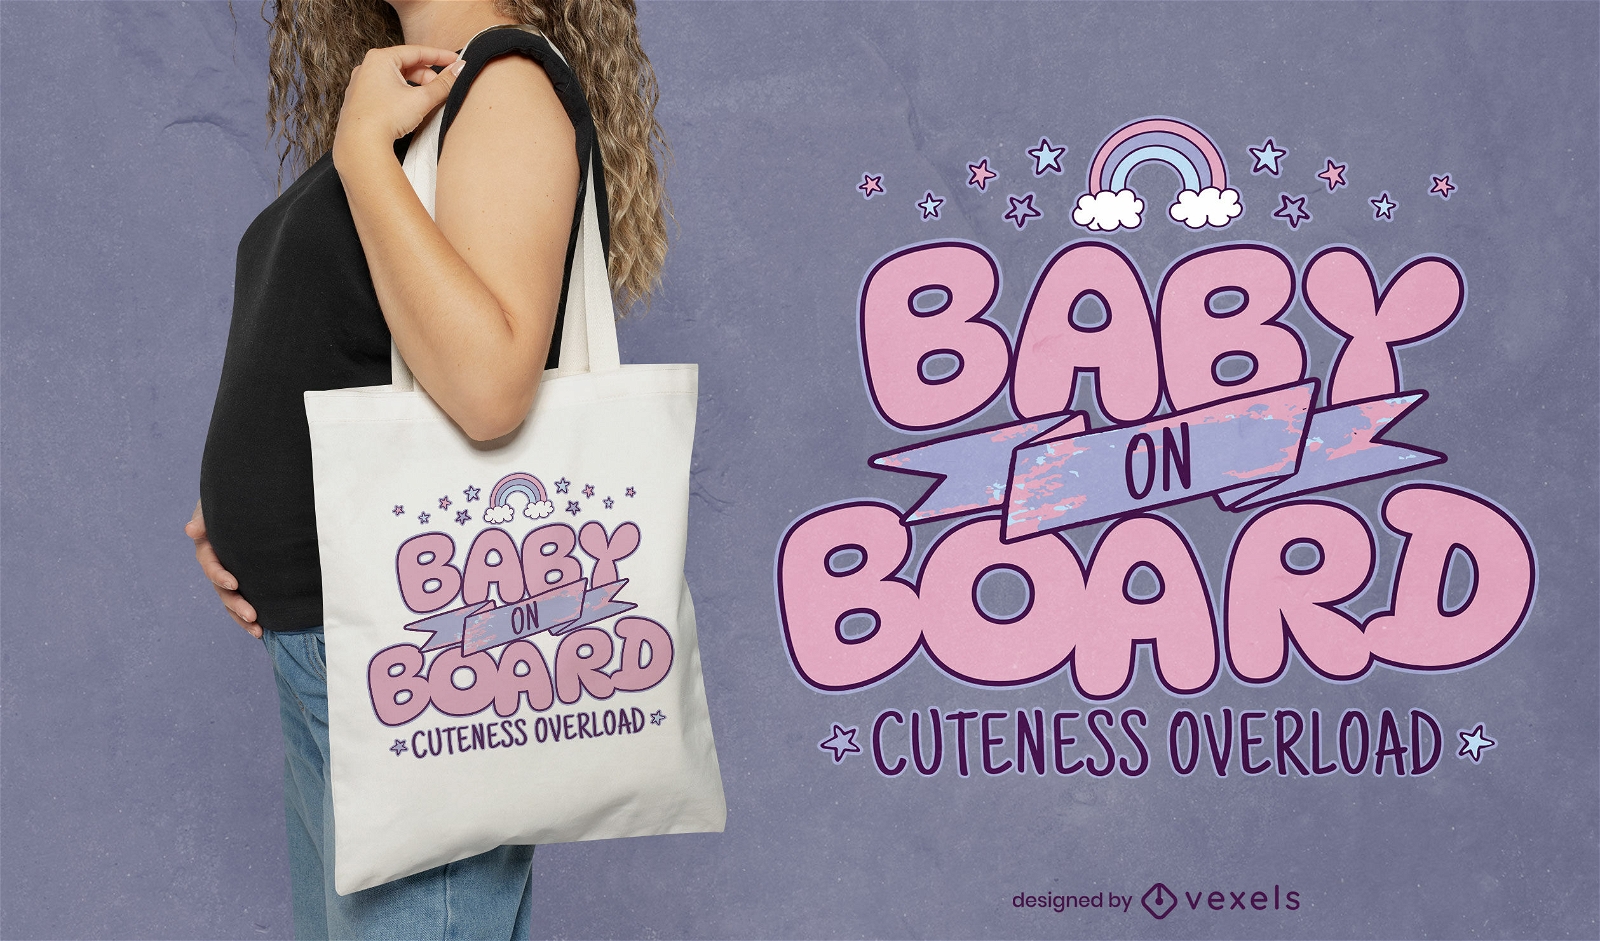 Baby on board maternity tote bag design